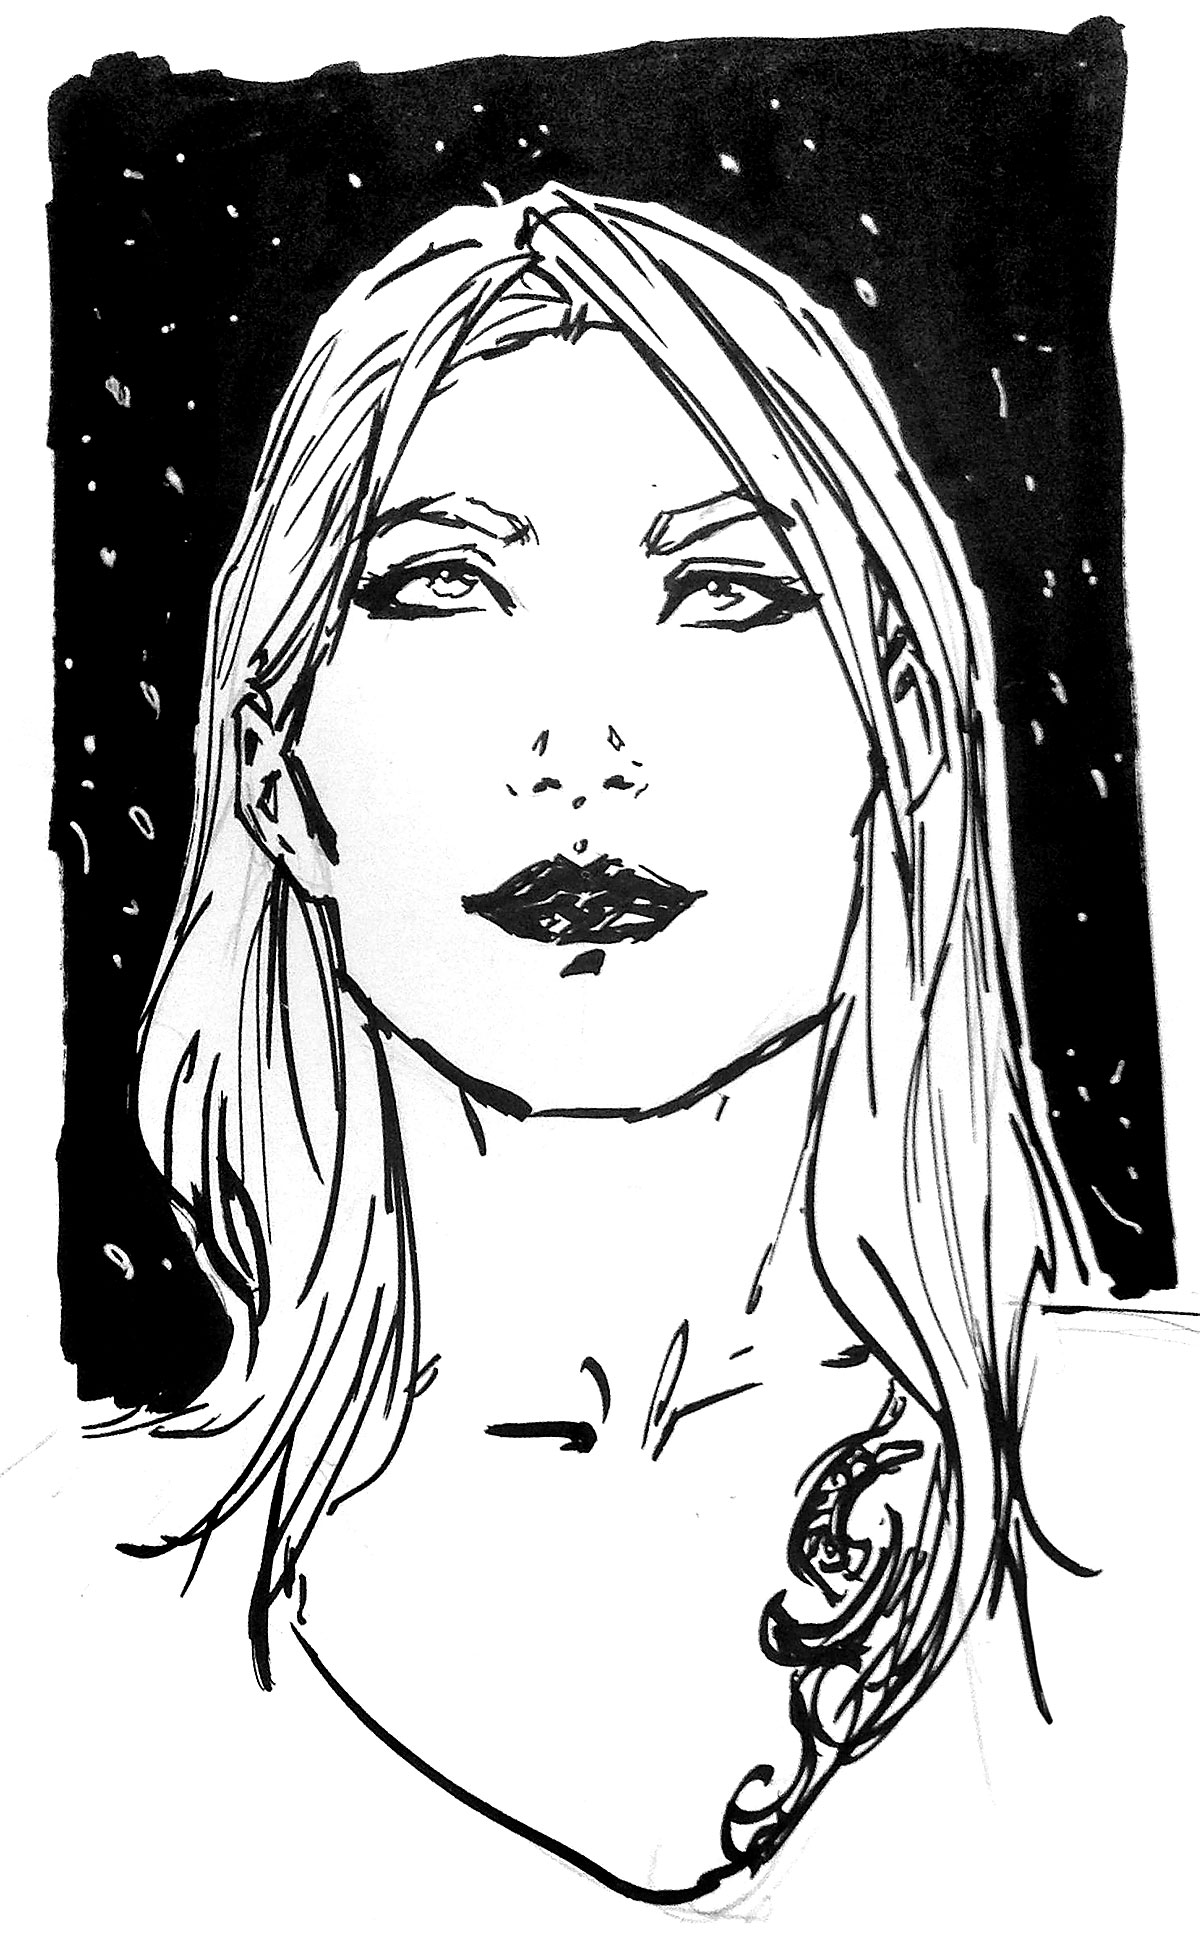 Simple yet striking brush pen illustration of Molly's face, looking self-assured and ethereal before a snowy backdrop.